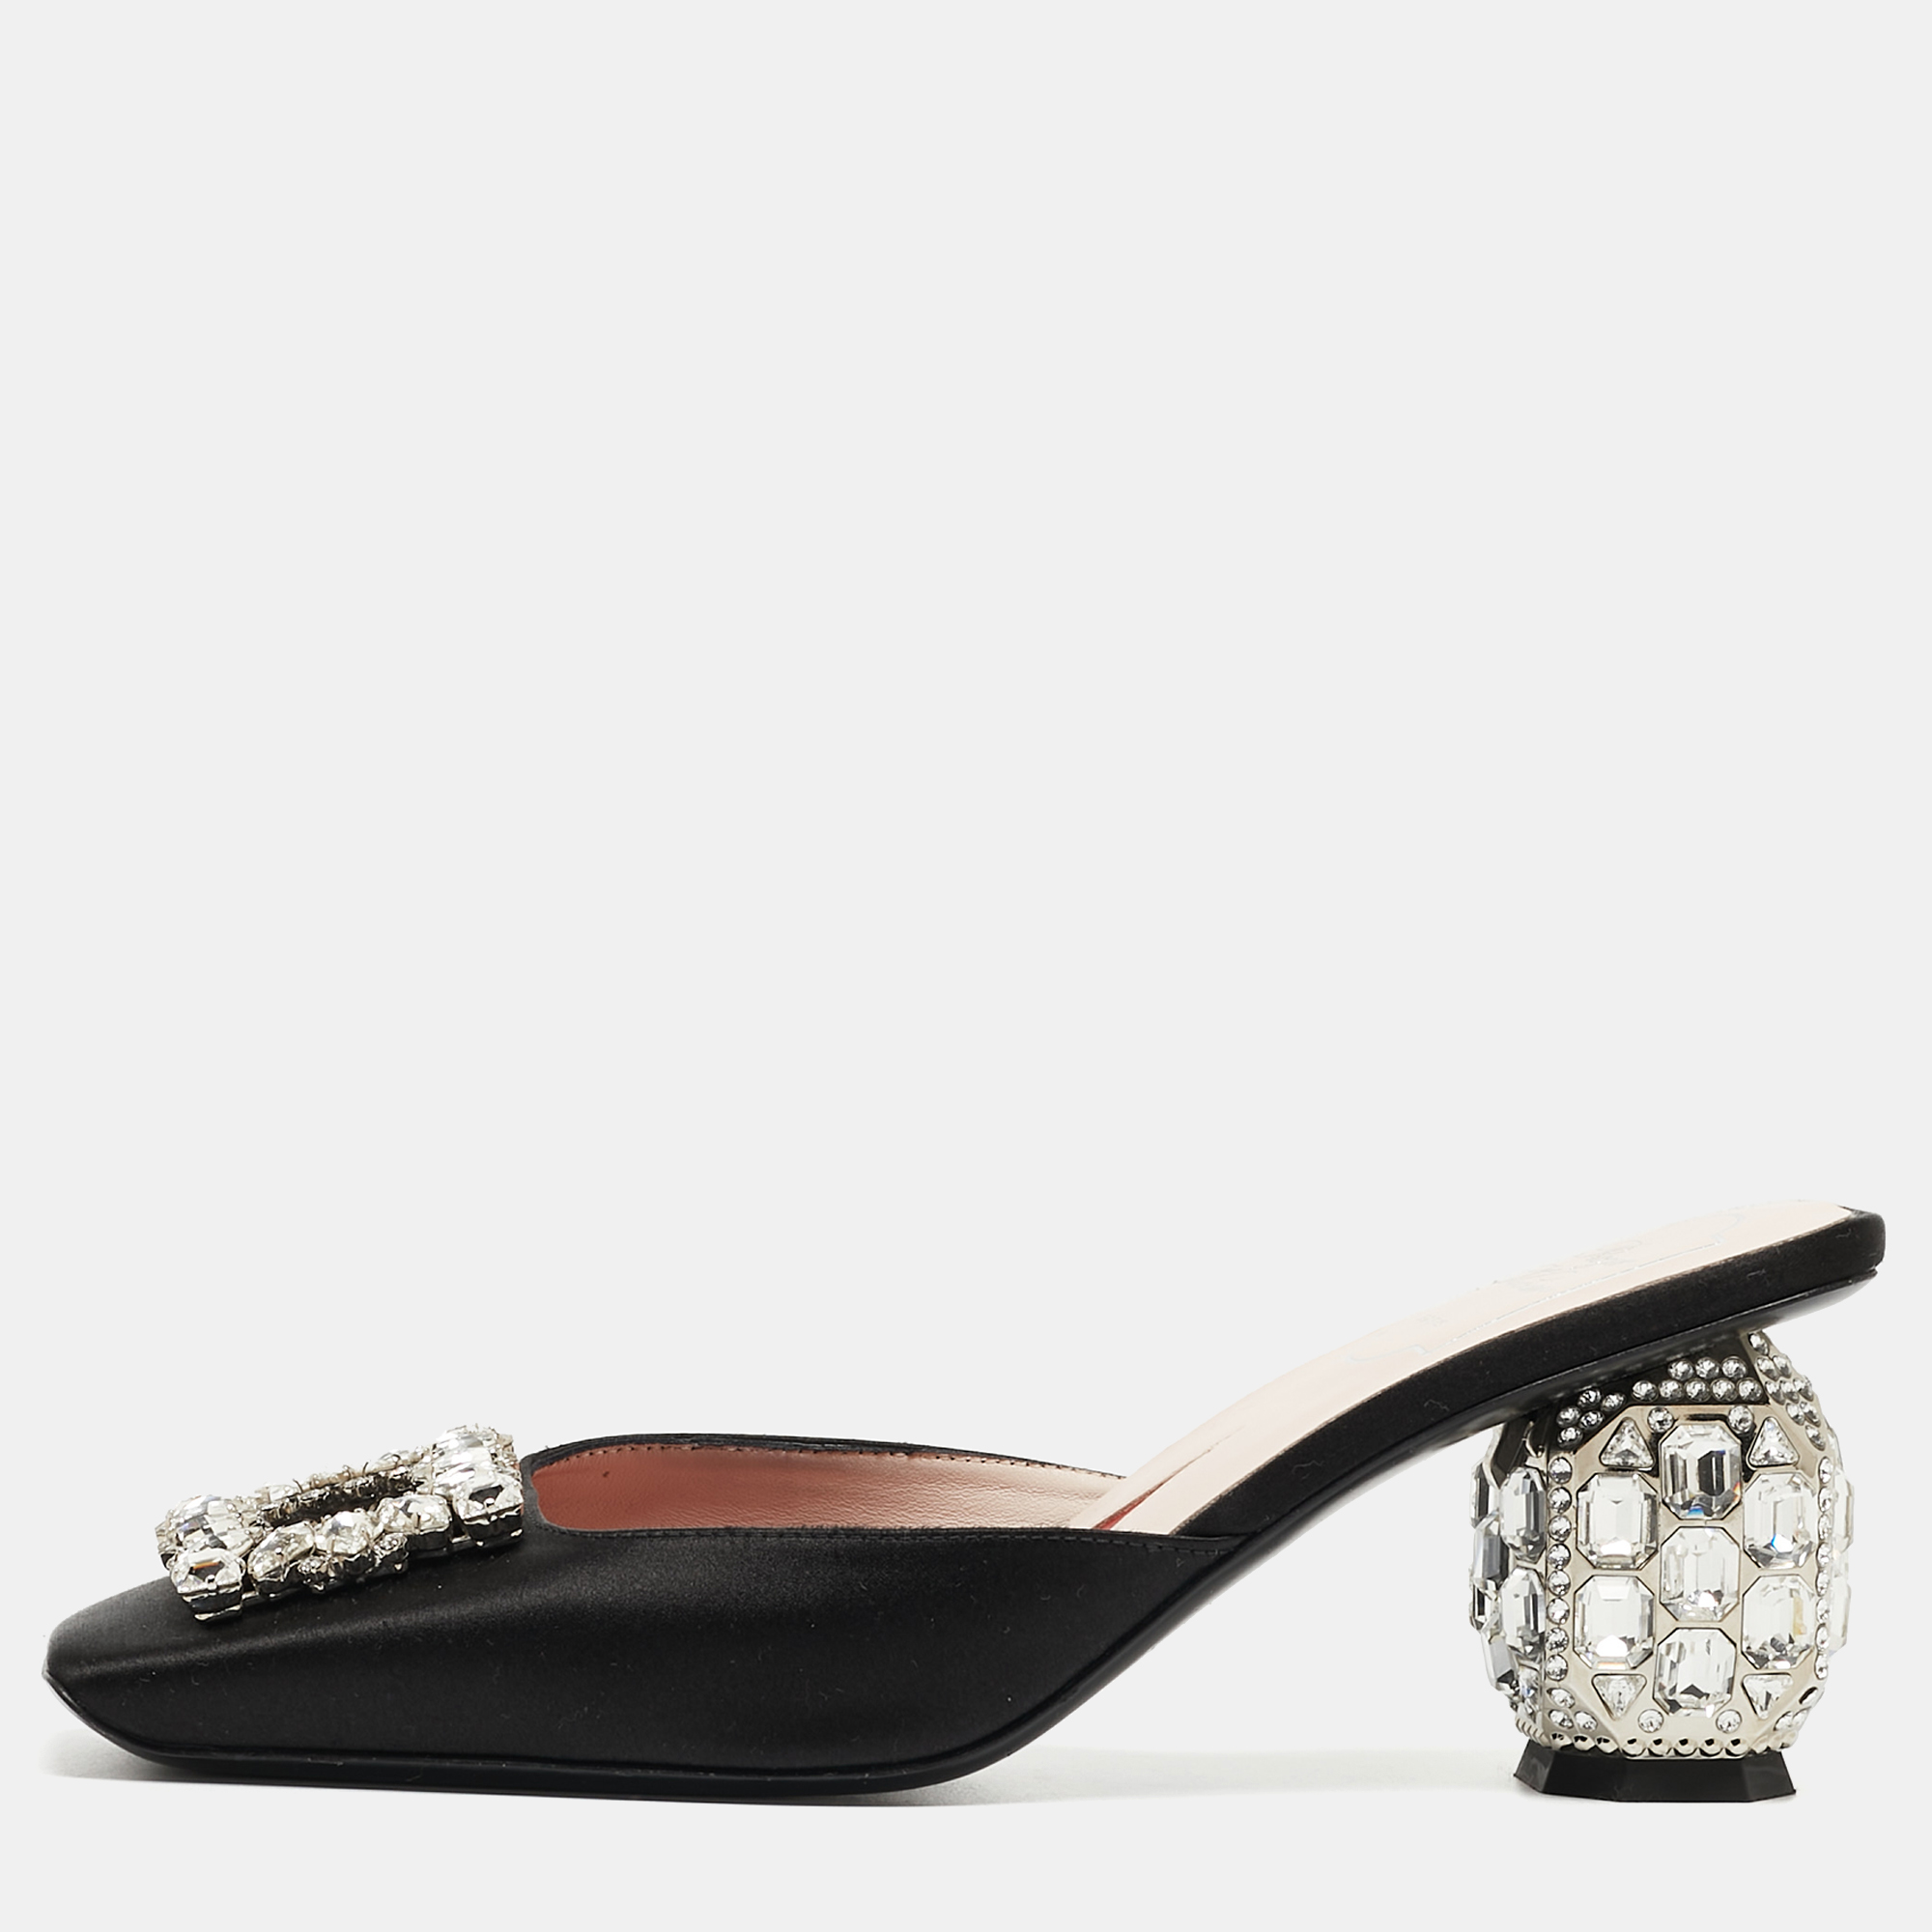 Designed exclusively for you this Roger Vivier pair is versatile. Crafted with satin these slide mules feature crystal embellished buckle detail on the vamps comfortable soles and a fabulous style. Keep it light and casual with this stunning black pair.